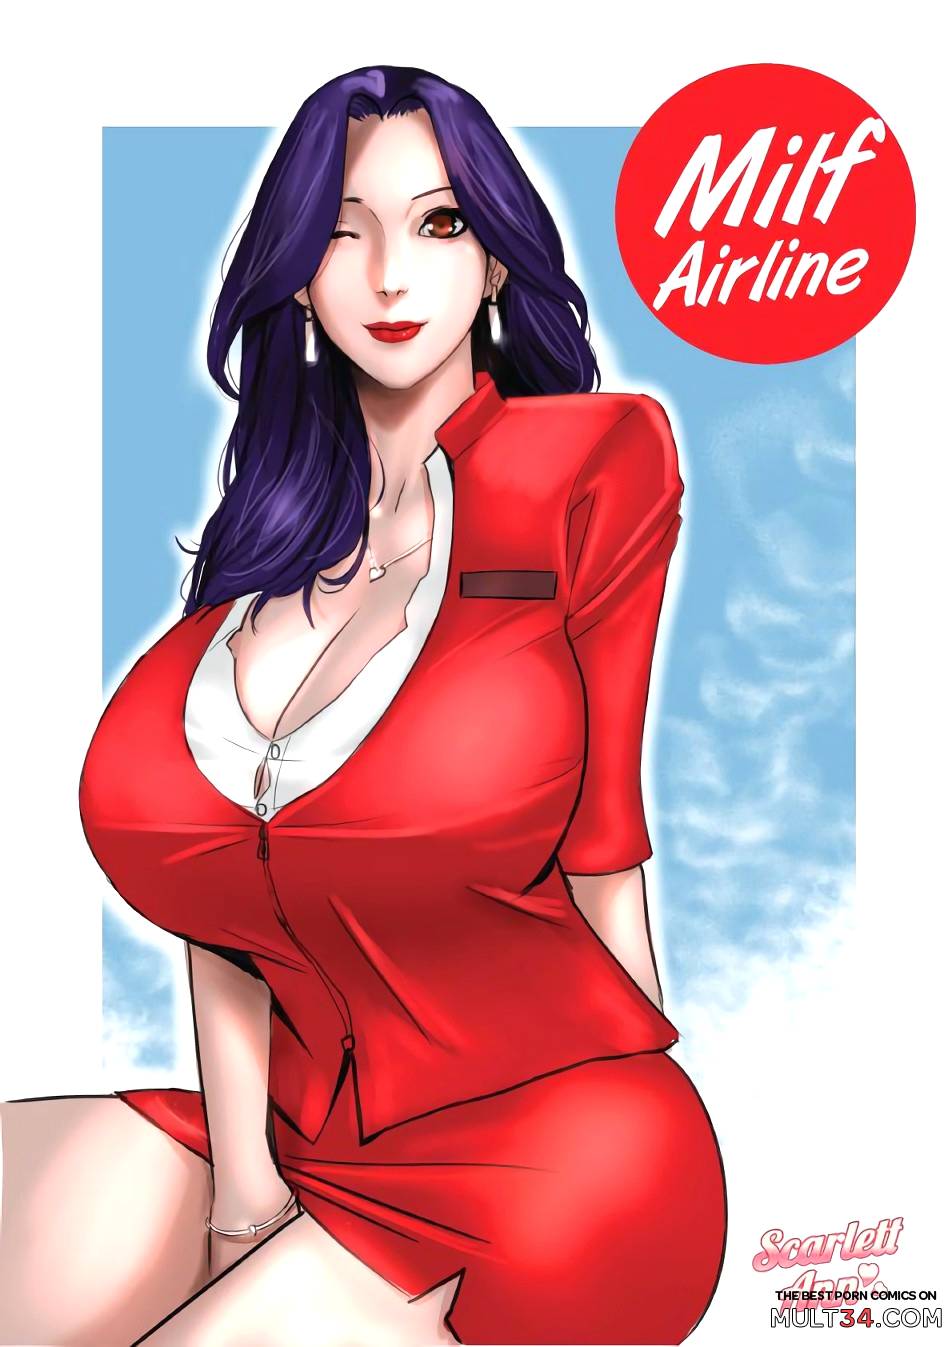 Milf Airline page 1